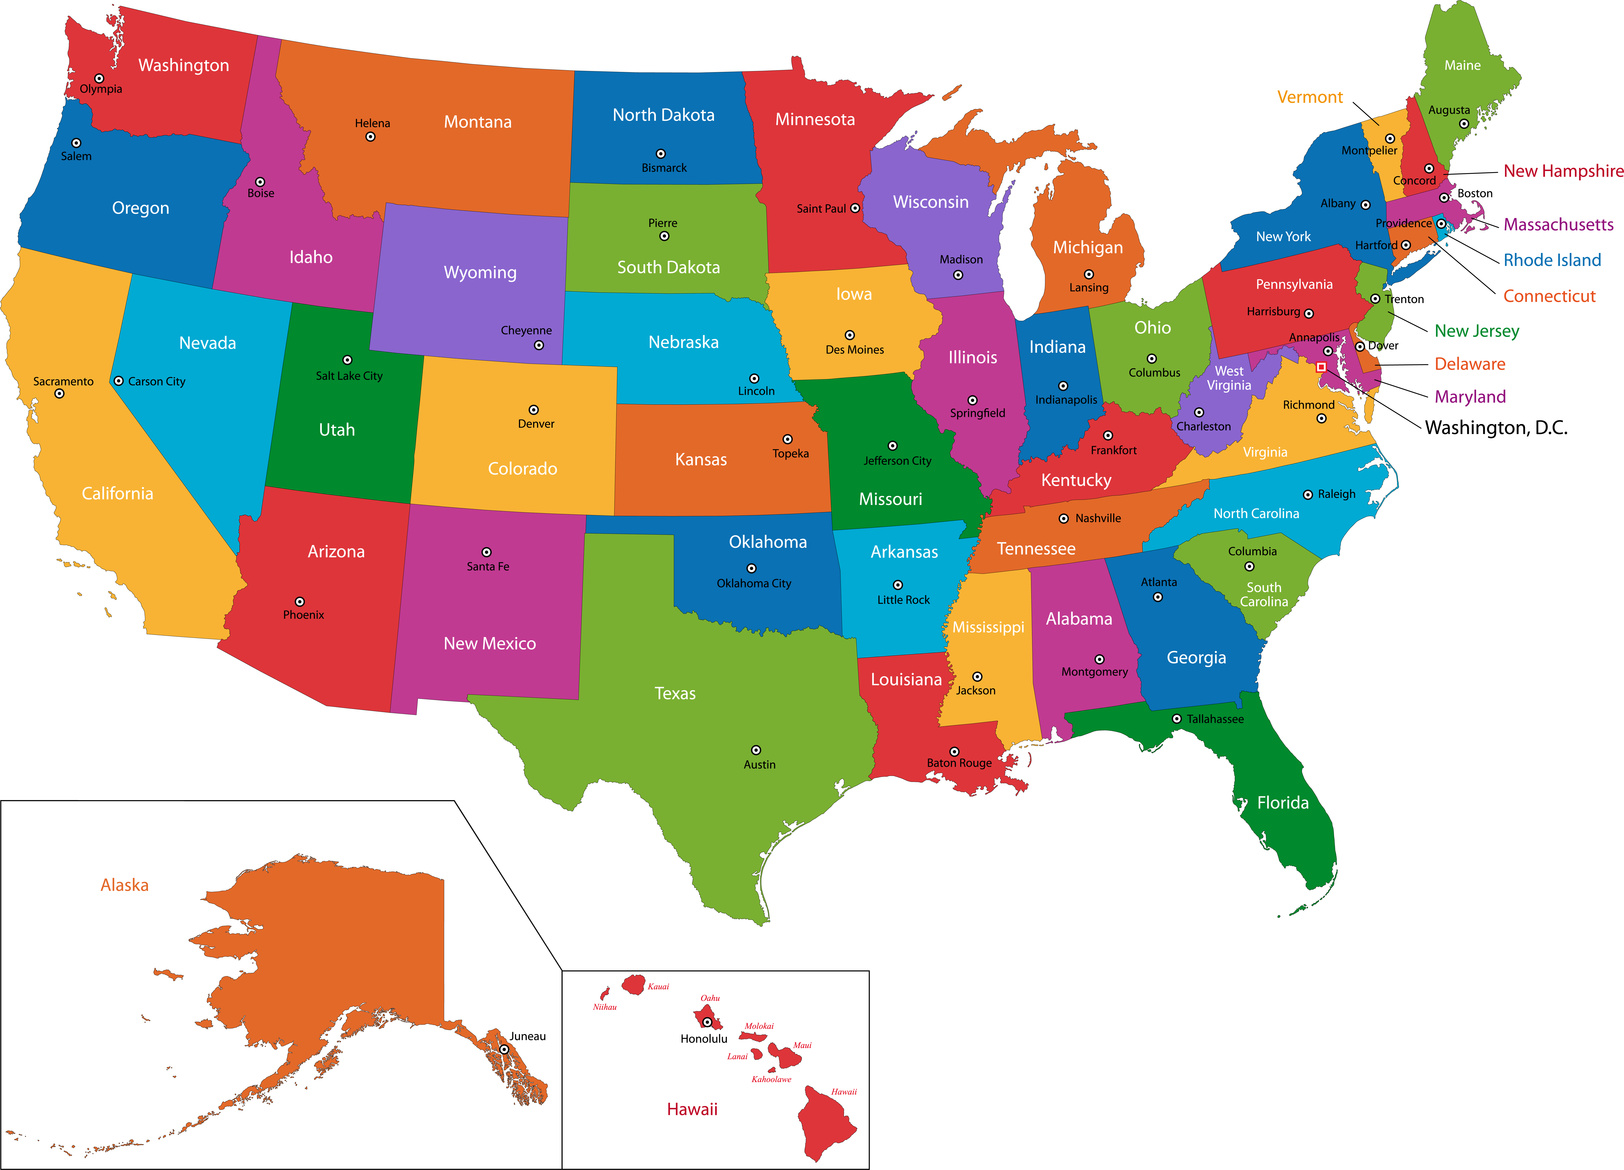 Map of United States and territories